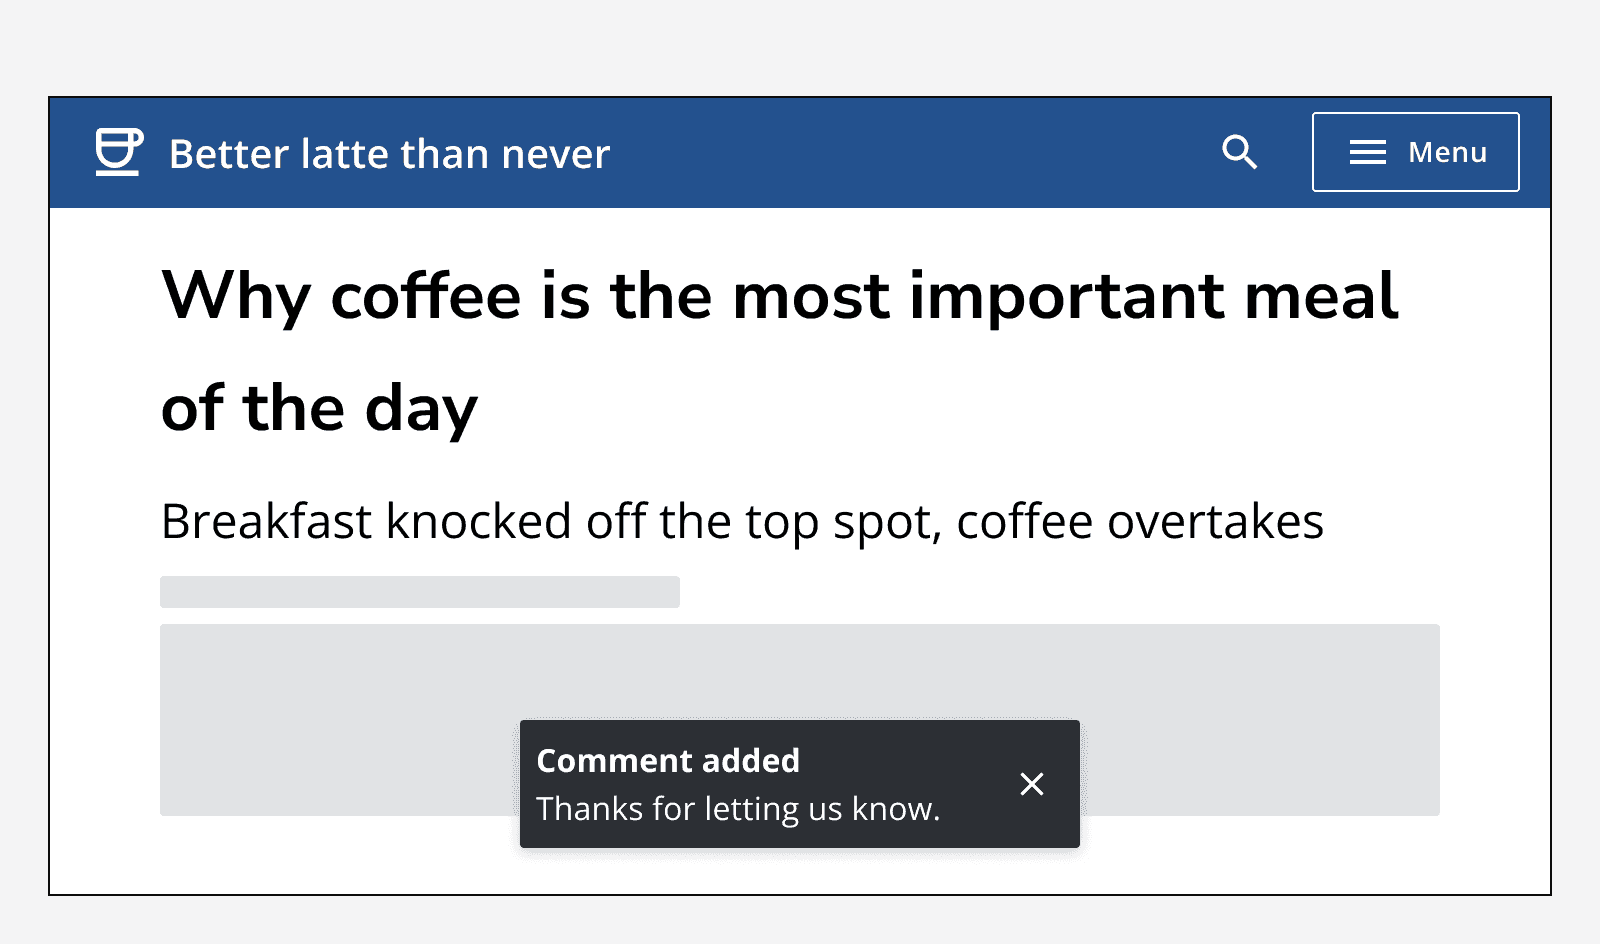 An app called ‘Better latte than never’ showing an article page with comments that displays a toast message with a title that says ‘Comment added’ and a description that says ‘Thanks for letting us know.’.